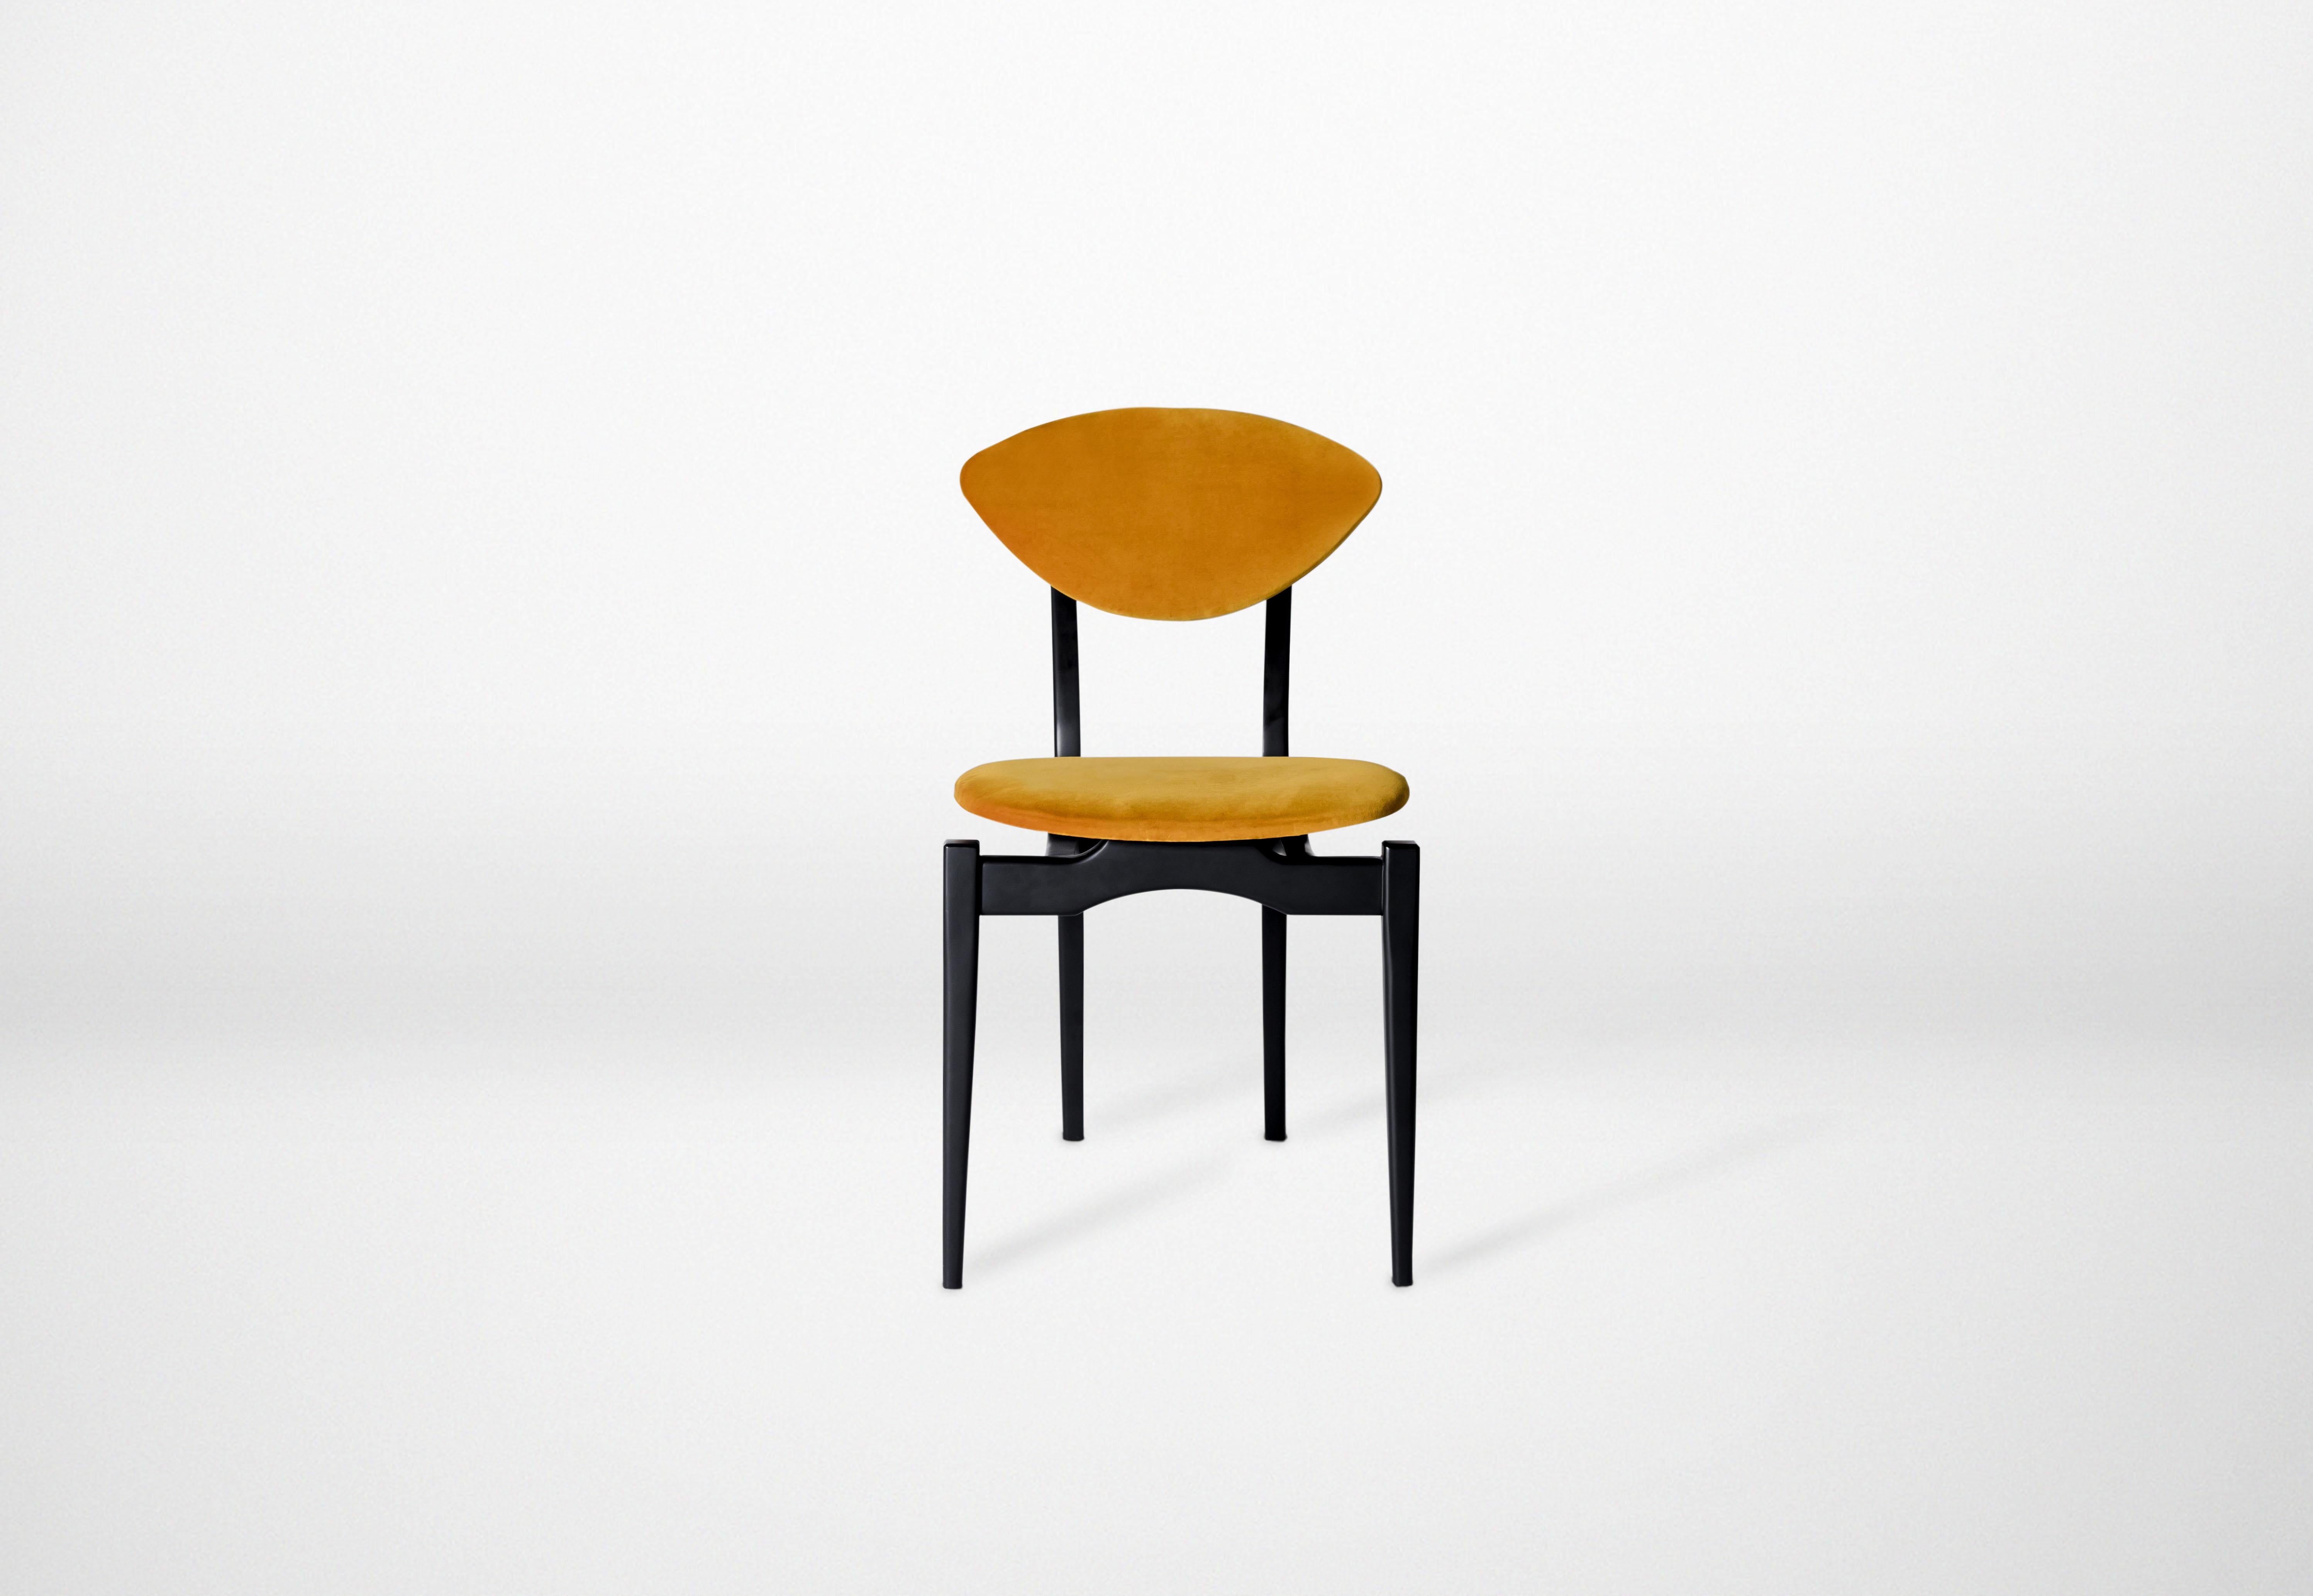 Yellow Femur dining chair by Atra Design.
Dimensions: D 58.5 x W 45 x H 85 cm.
Materials: fabric, walnut.
Available in leather or fabric seat and in other colors.

Atra Design
We are Atra, a furniture brand produced by Atra form a mexico city–based